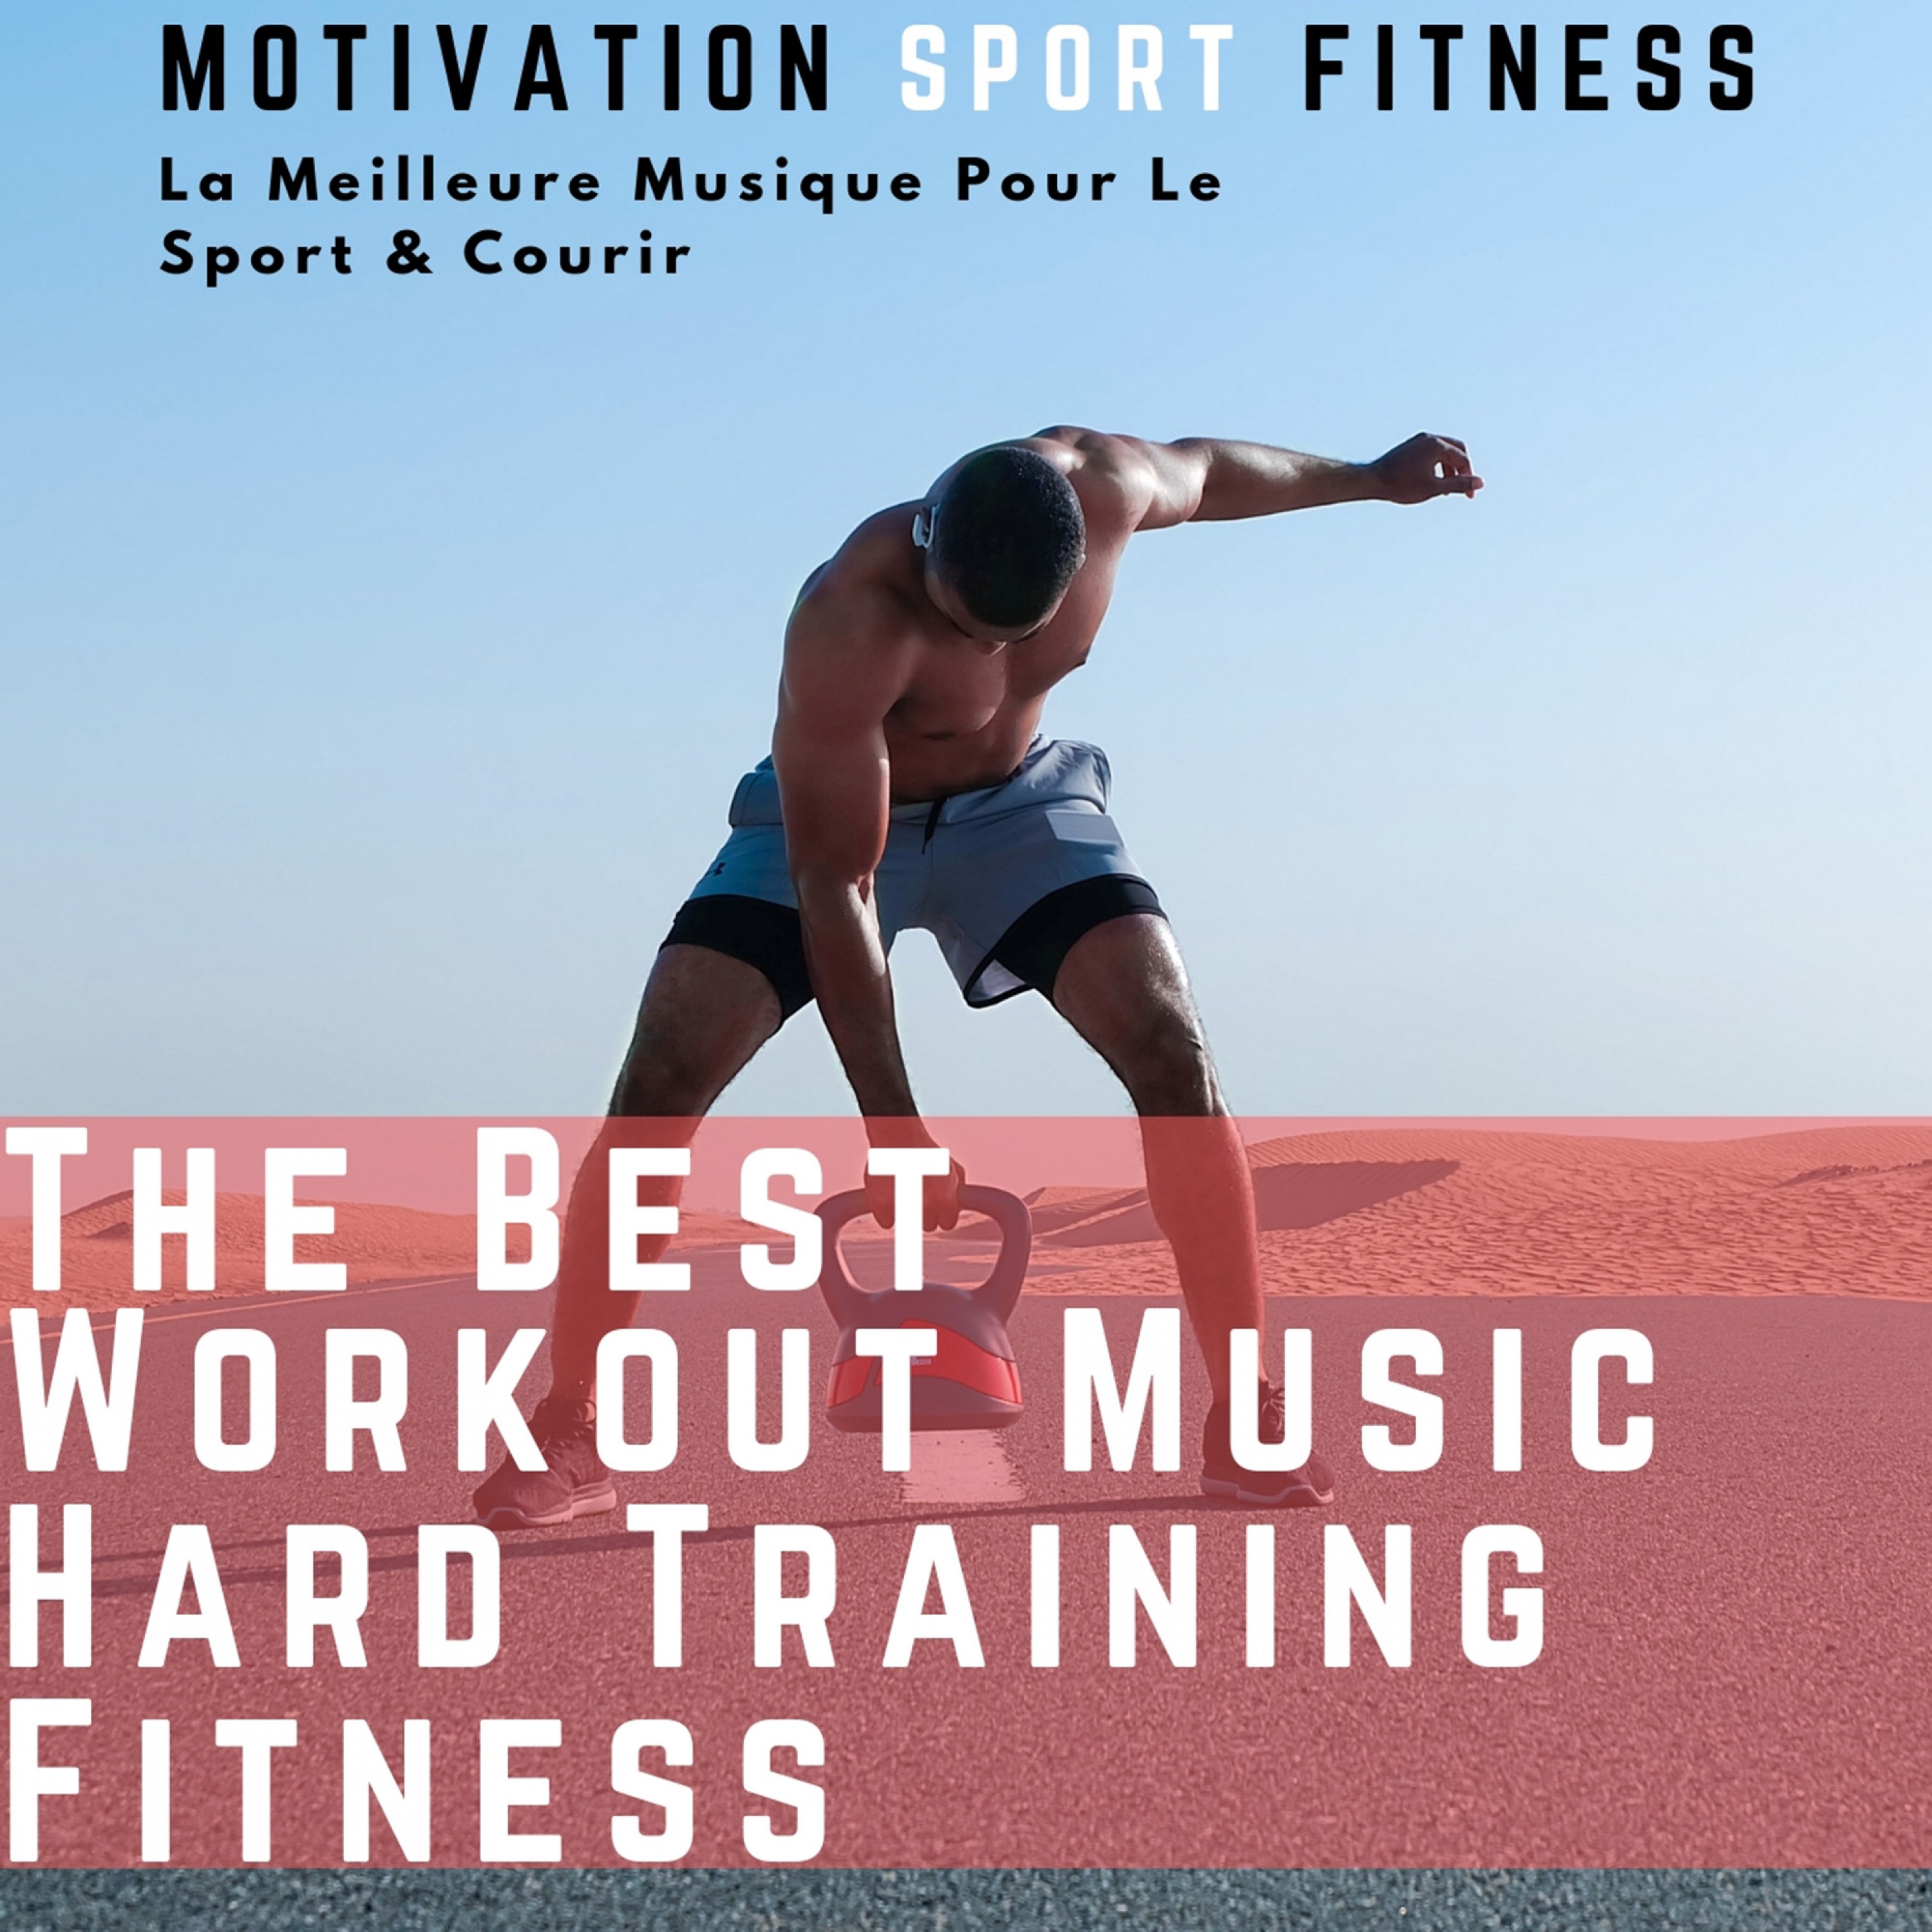 The Best Workout Music - Hard Training Fitness